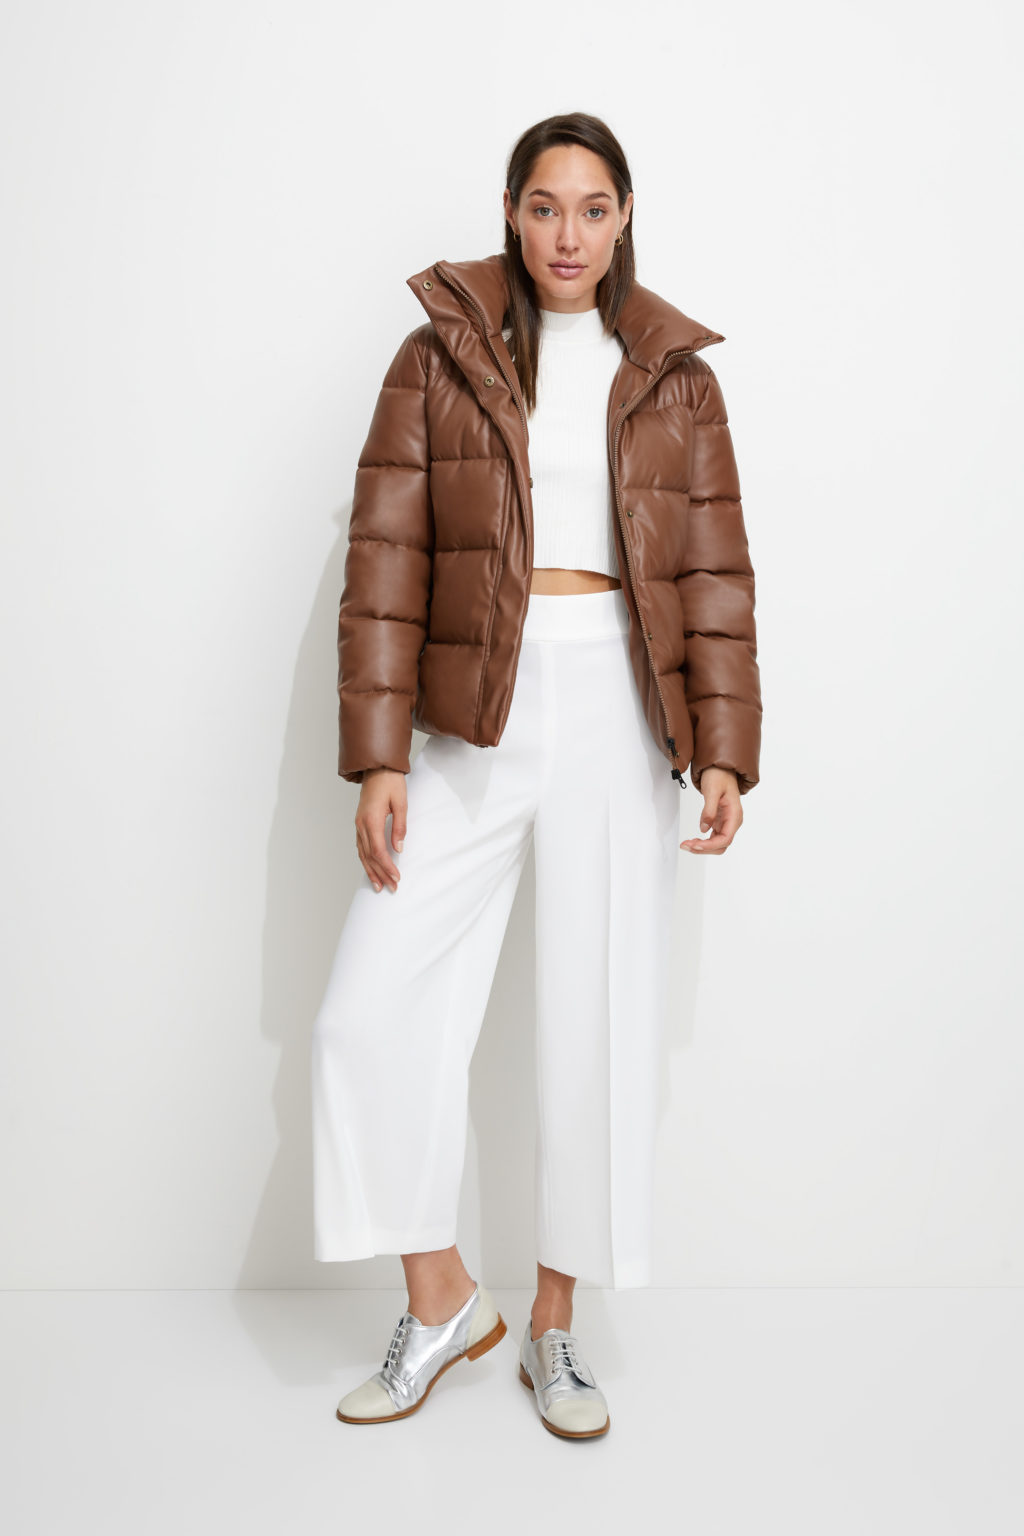 Major Tom Puffer Jacket | The Style Capsule